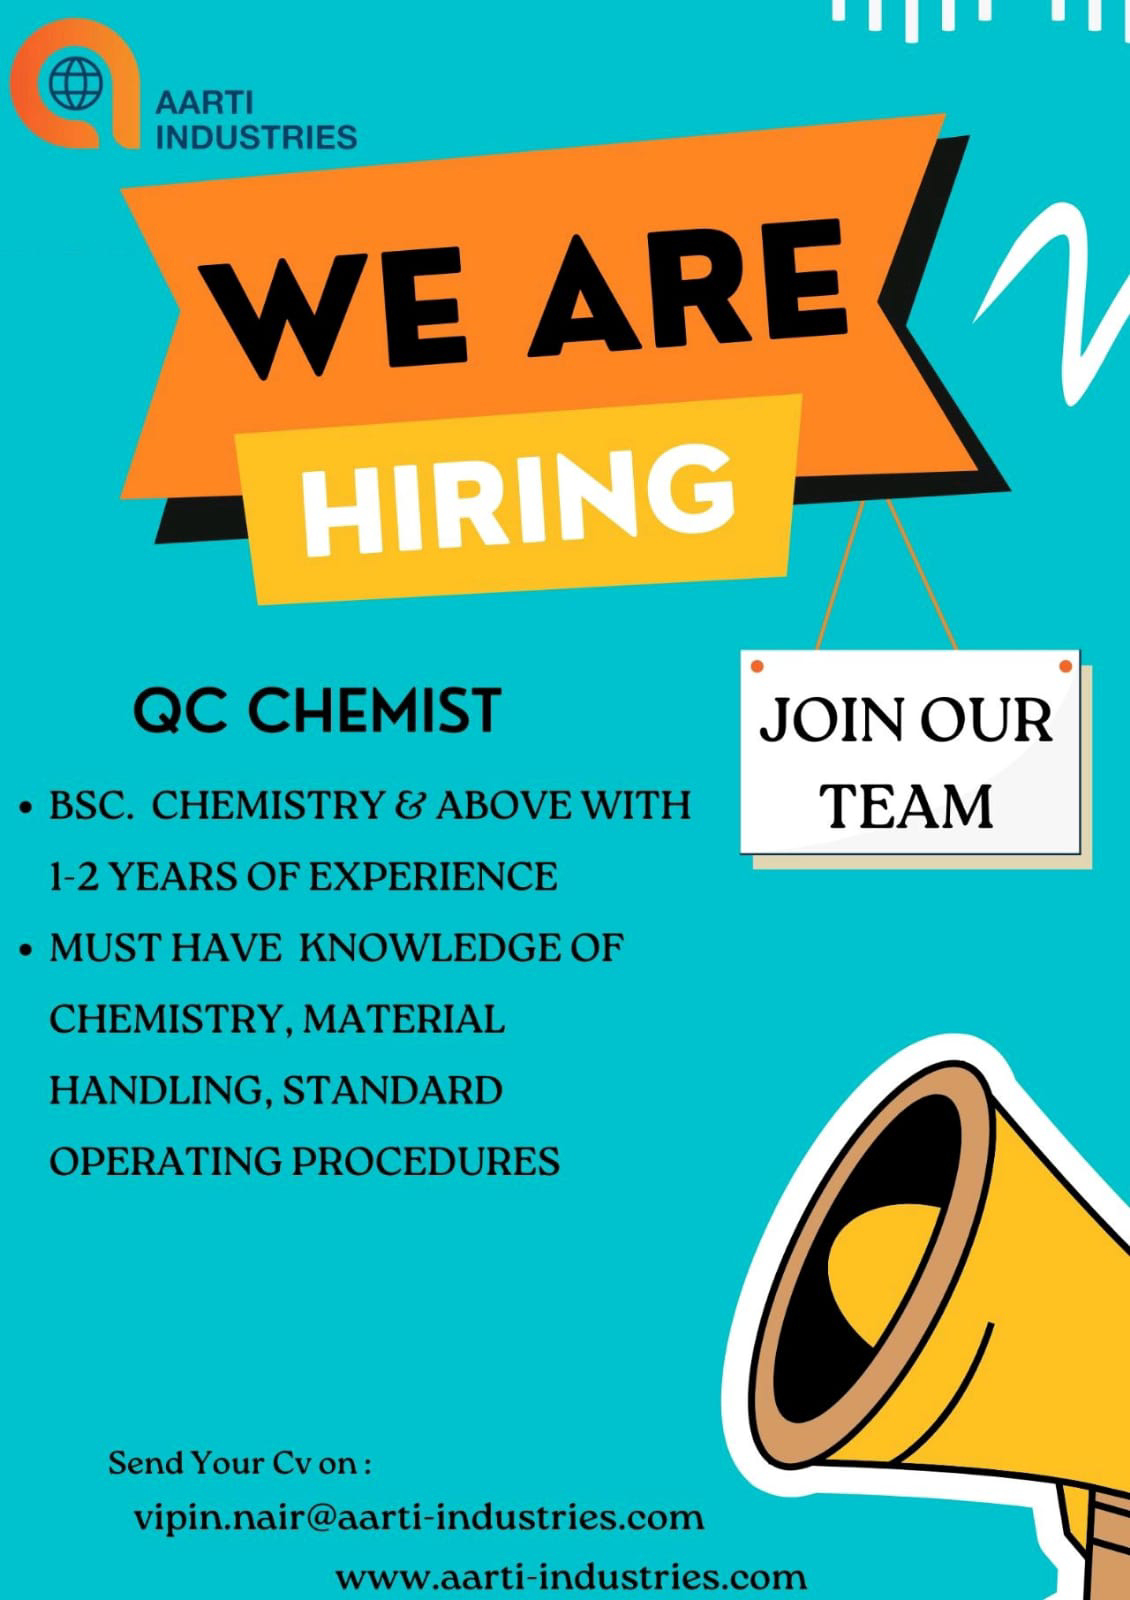 Job Available's for Aarti Industries Ltd Job Vacancy for QC Chemist